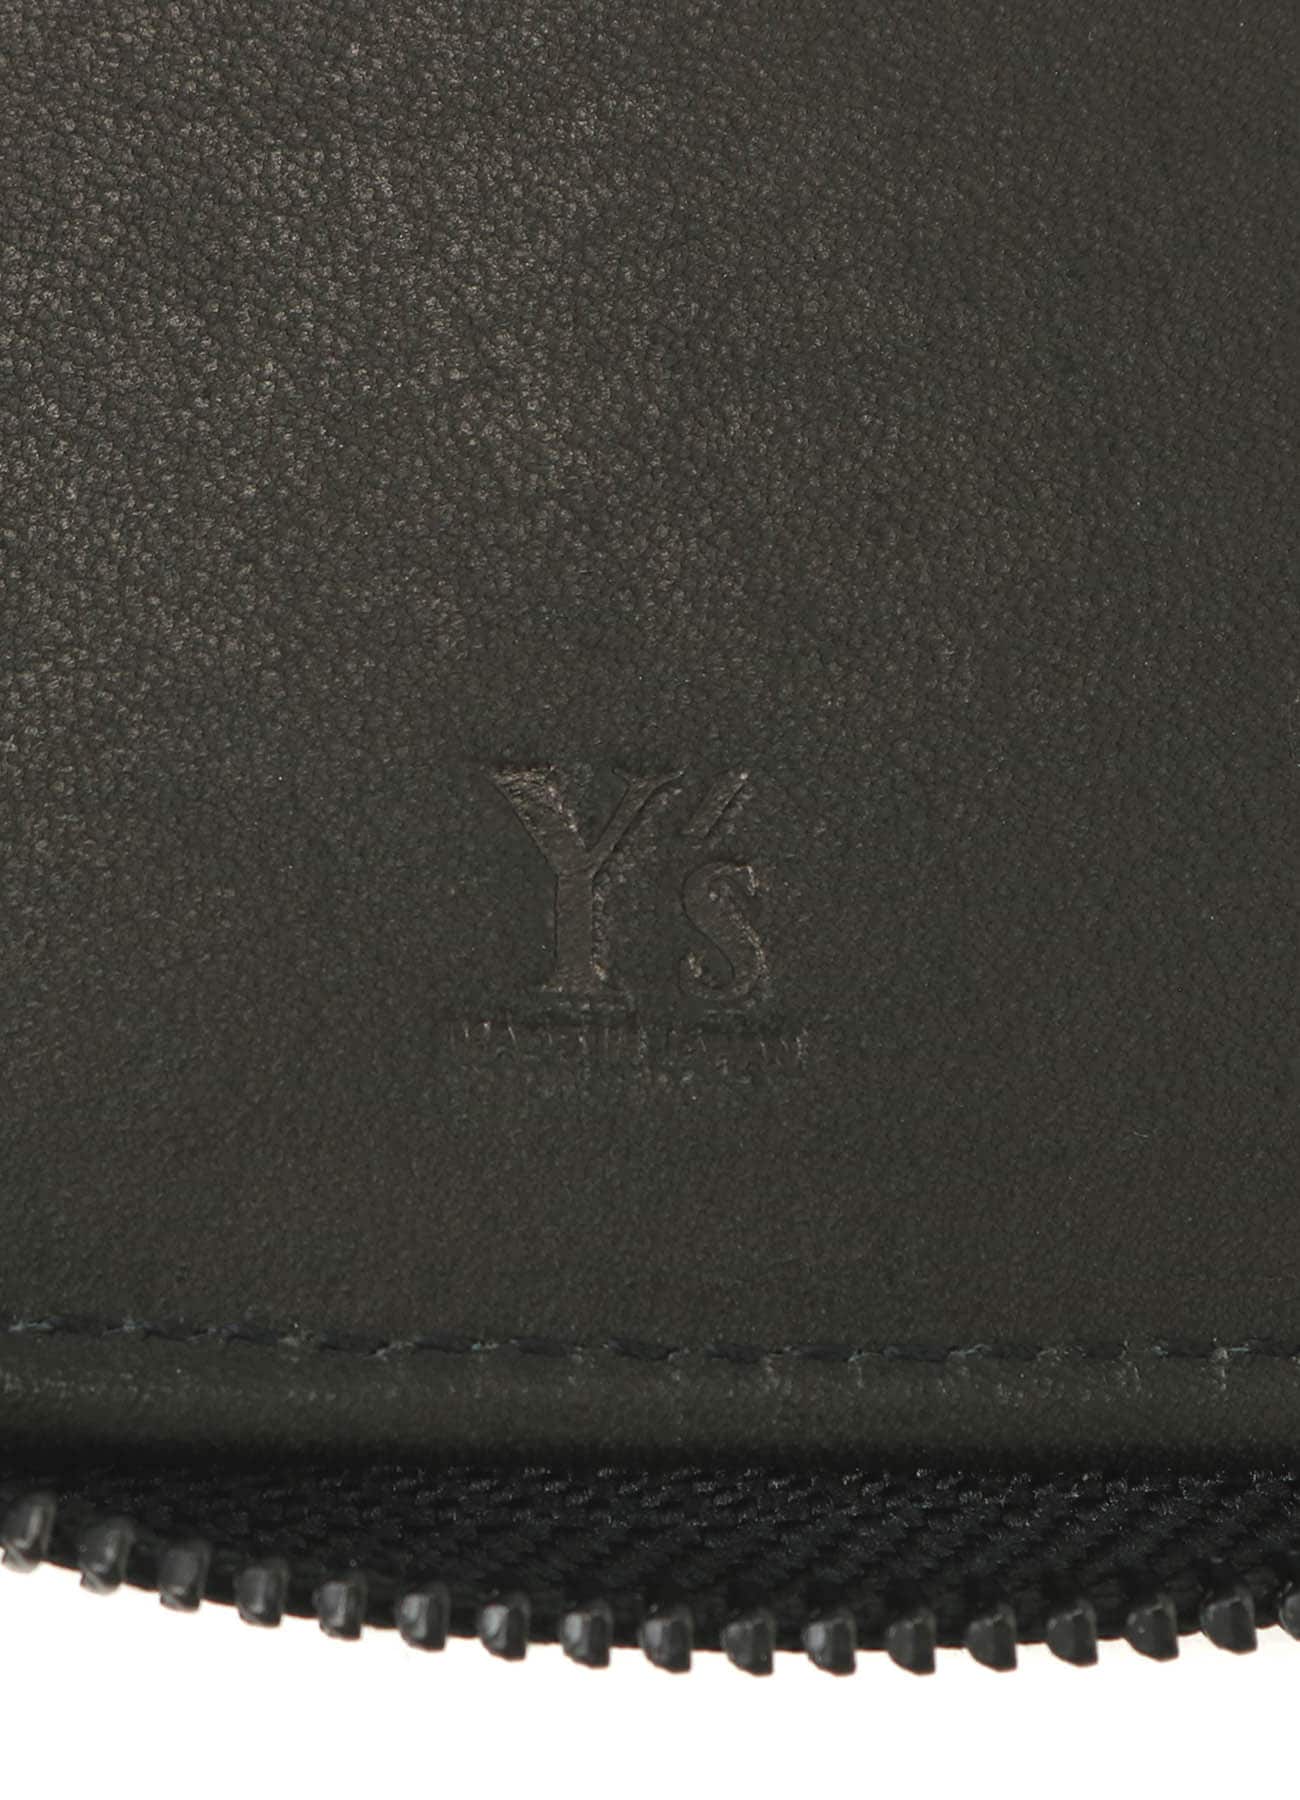 TANNED/ENAMEL-COATED LEATHER WALLET